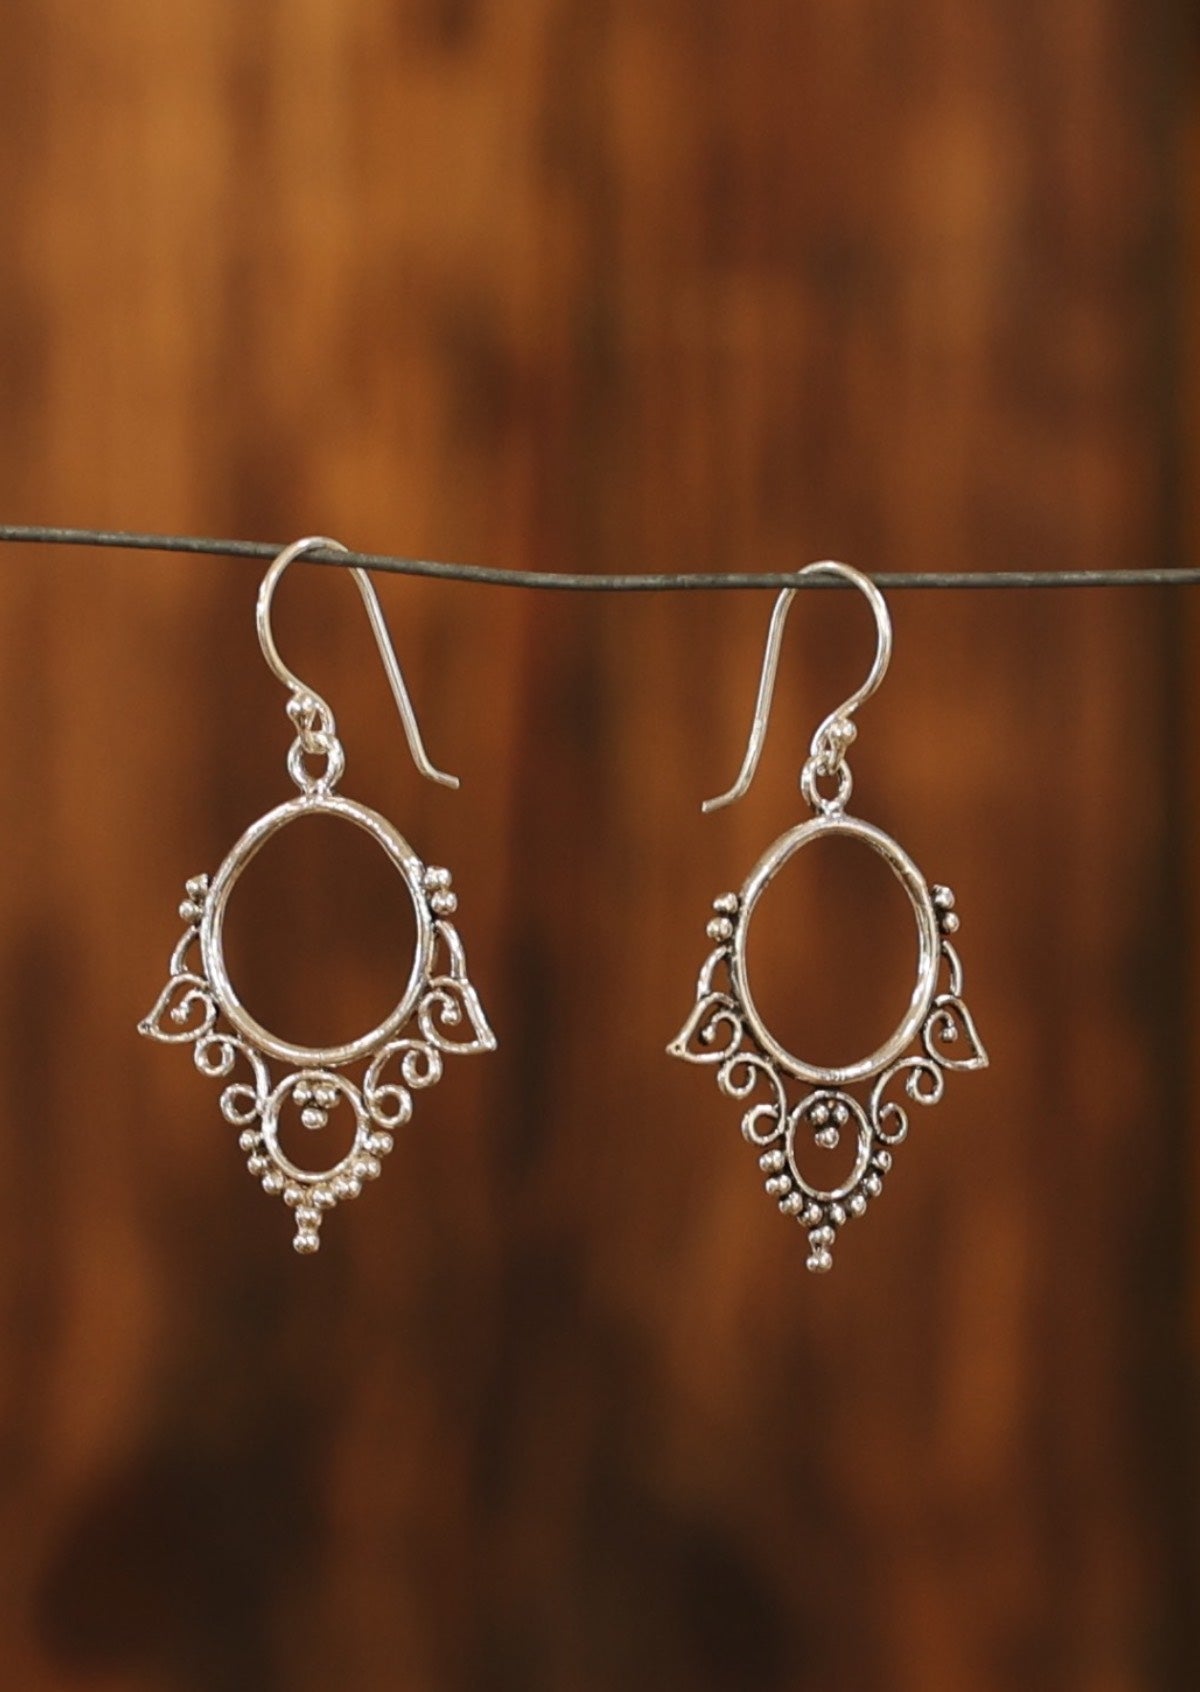 Sterling silver hook earrings crafted from wire details around a small hoop